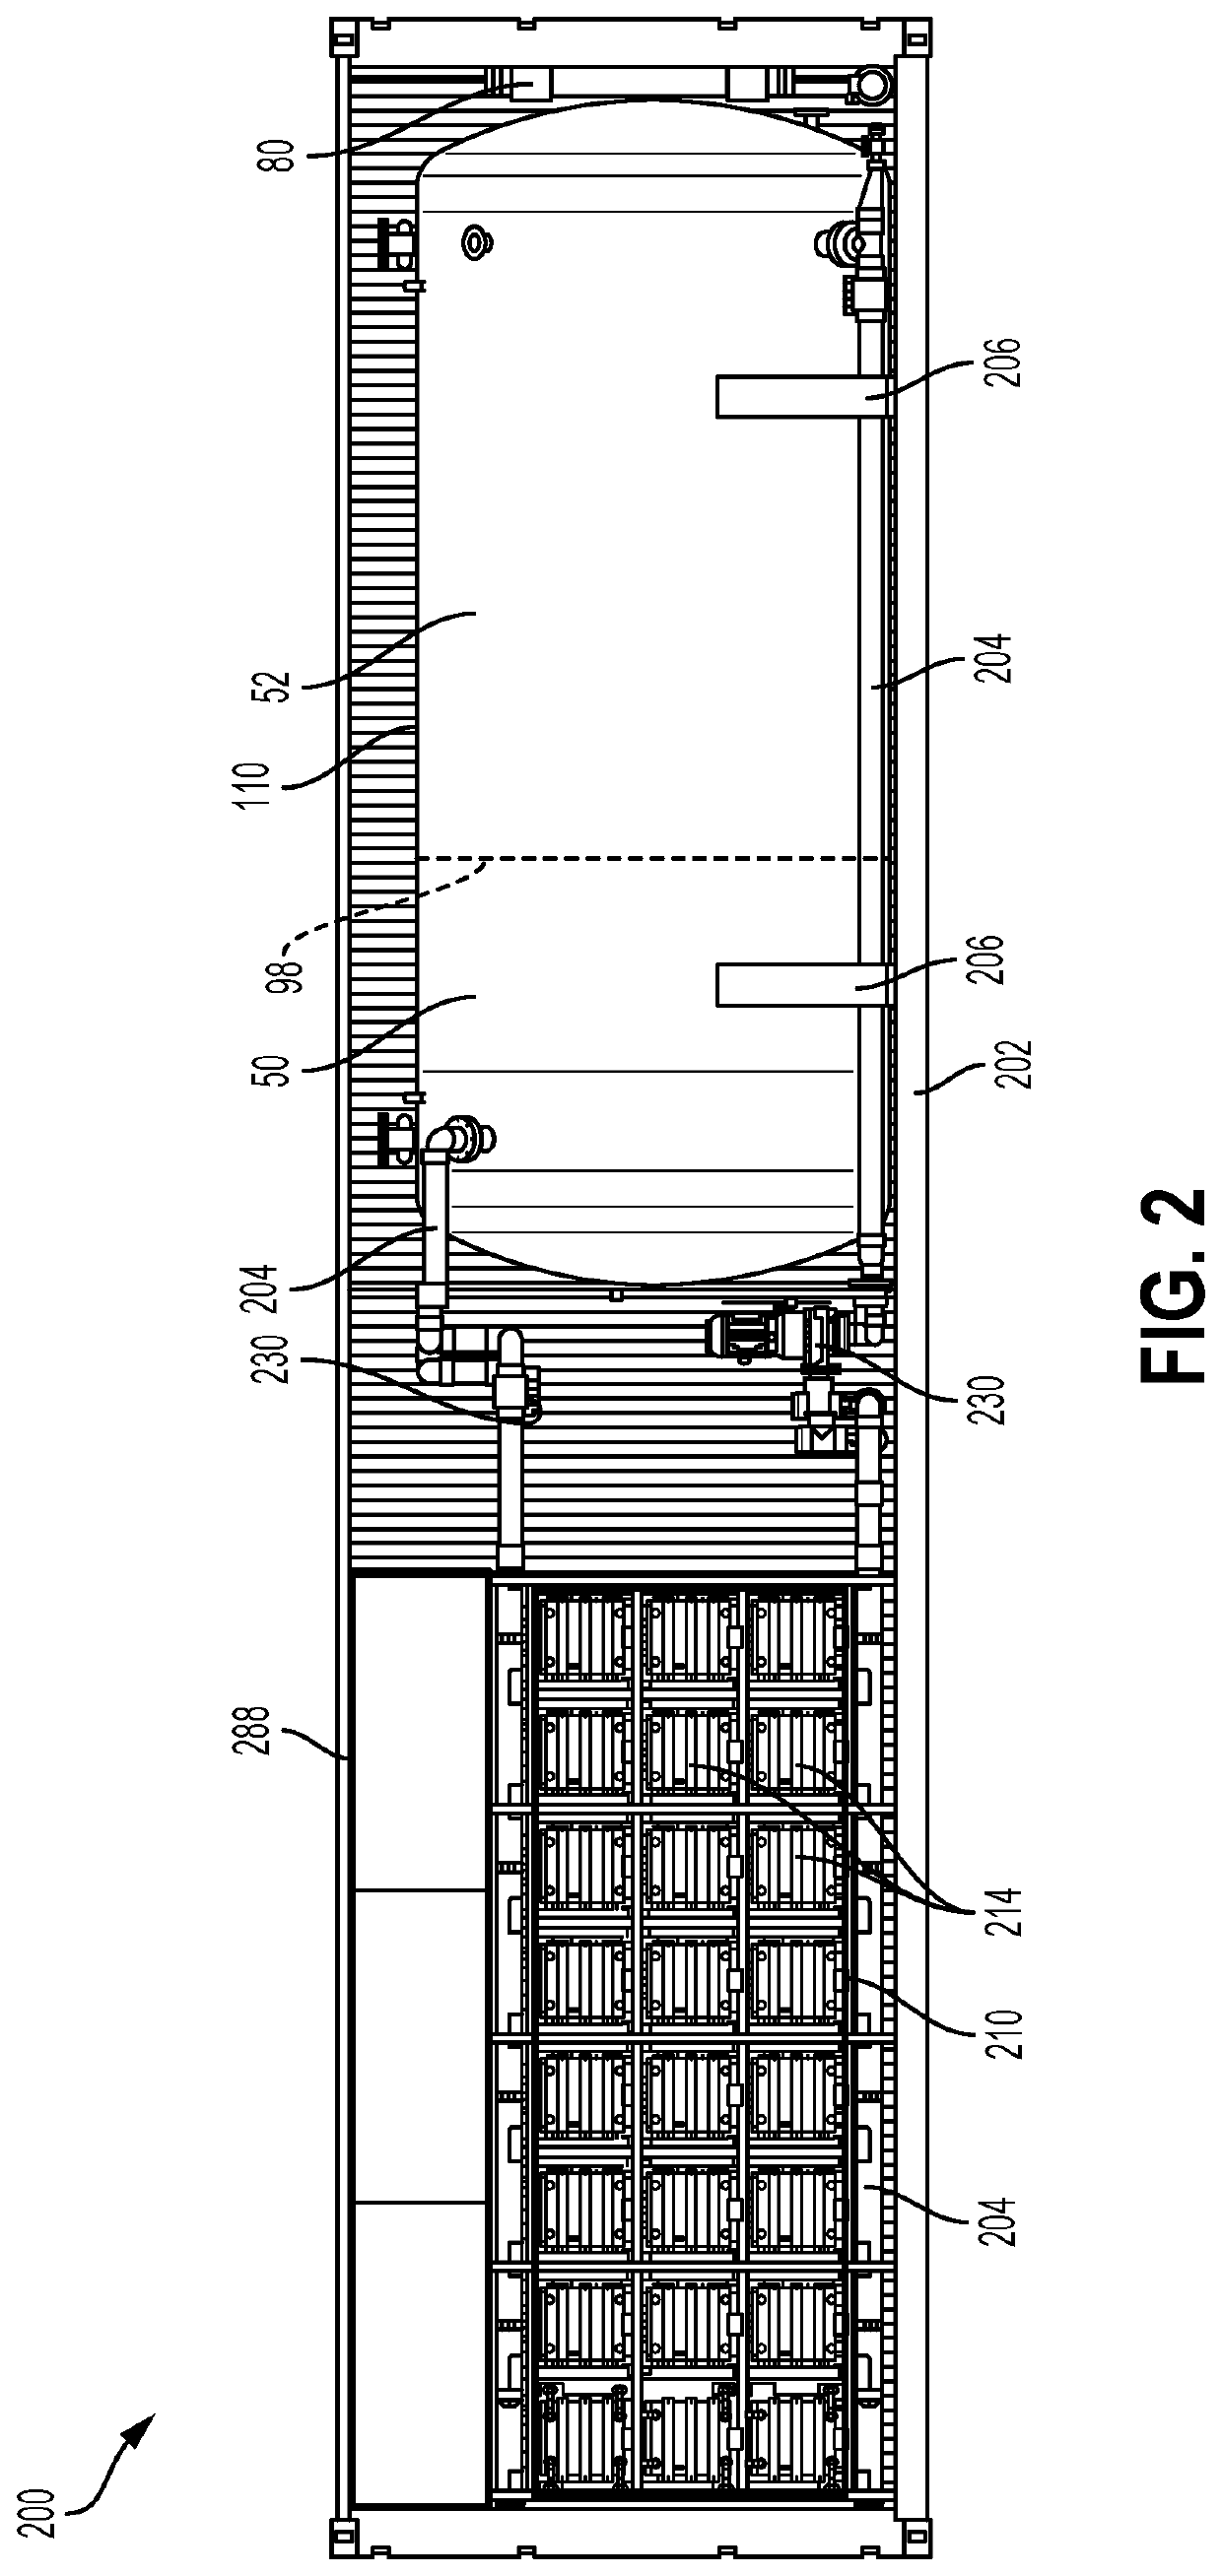 Methods and system for a battery